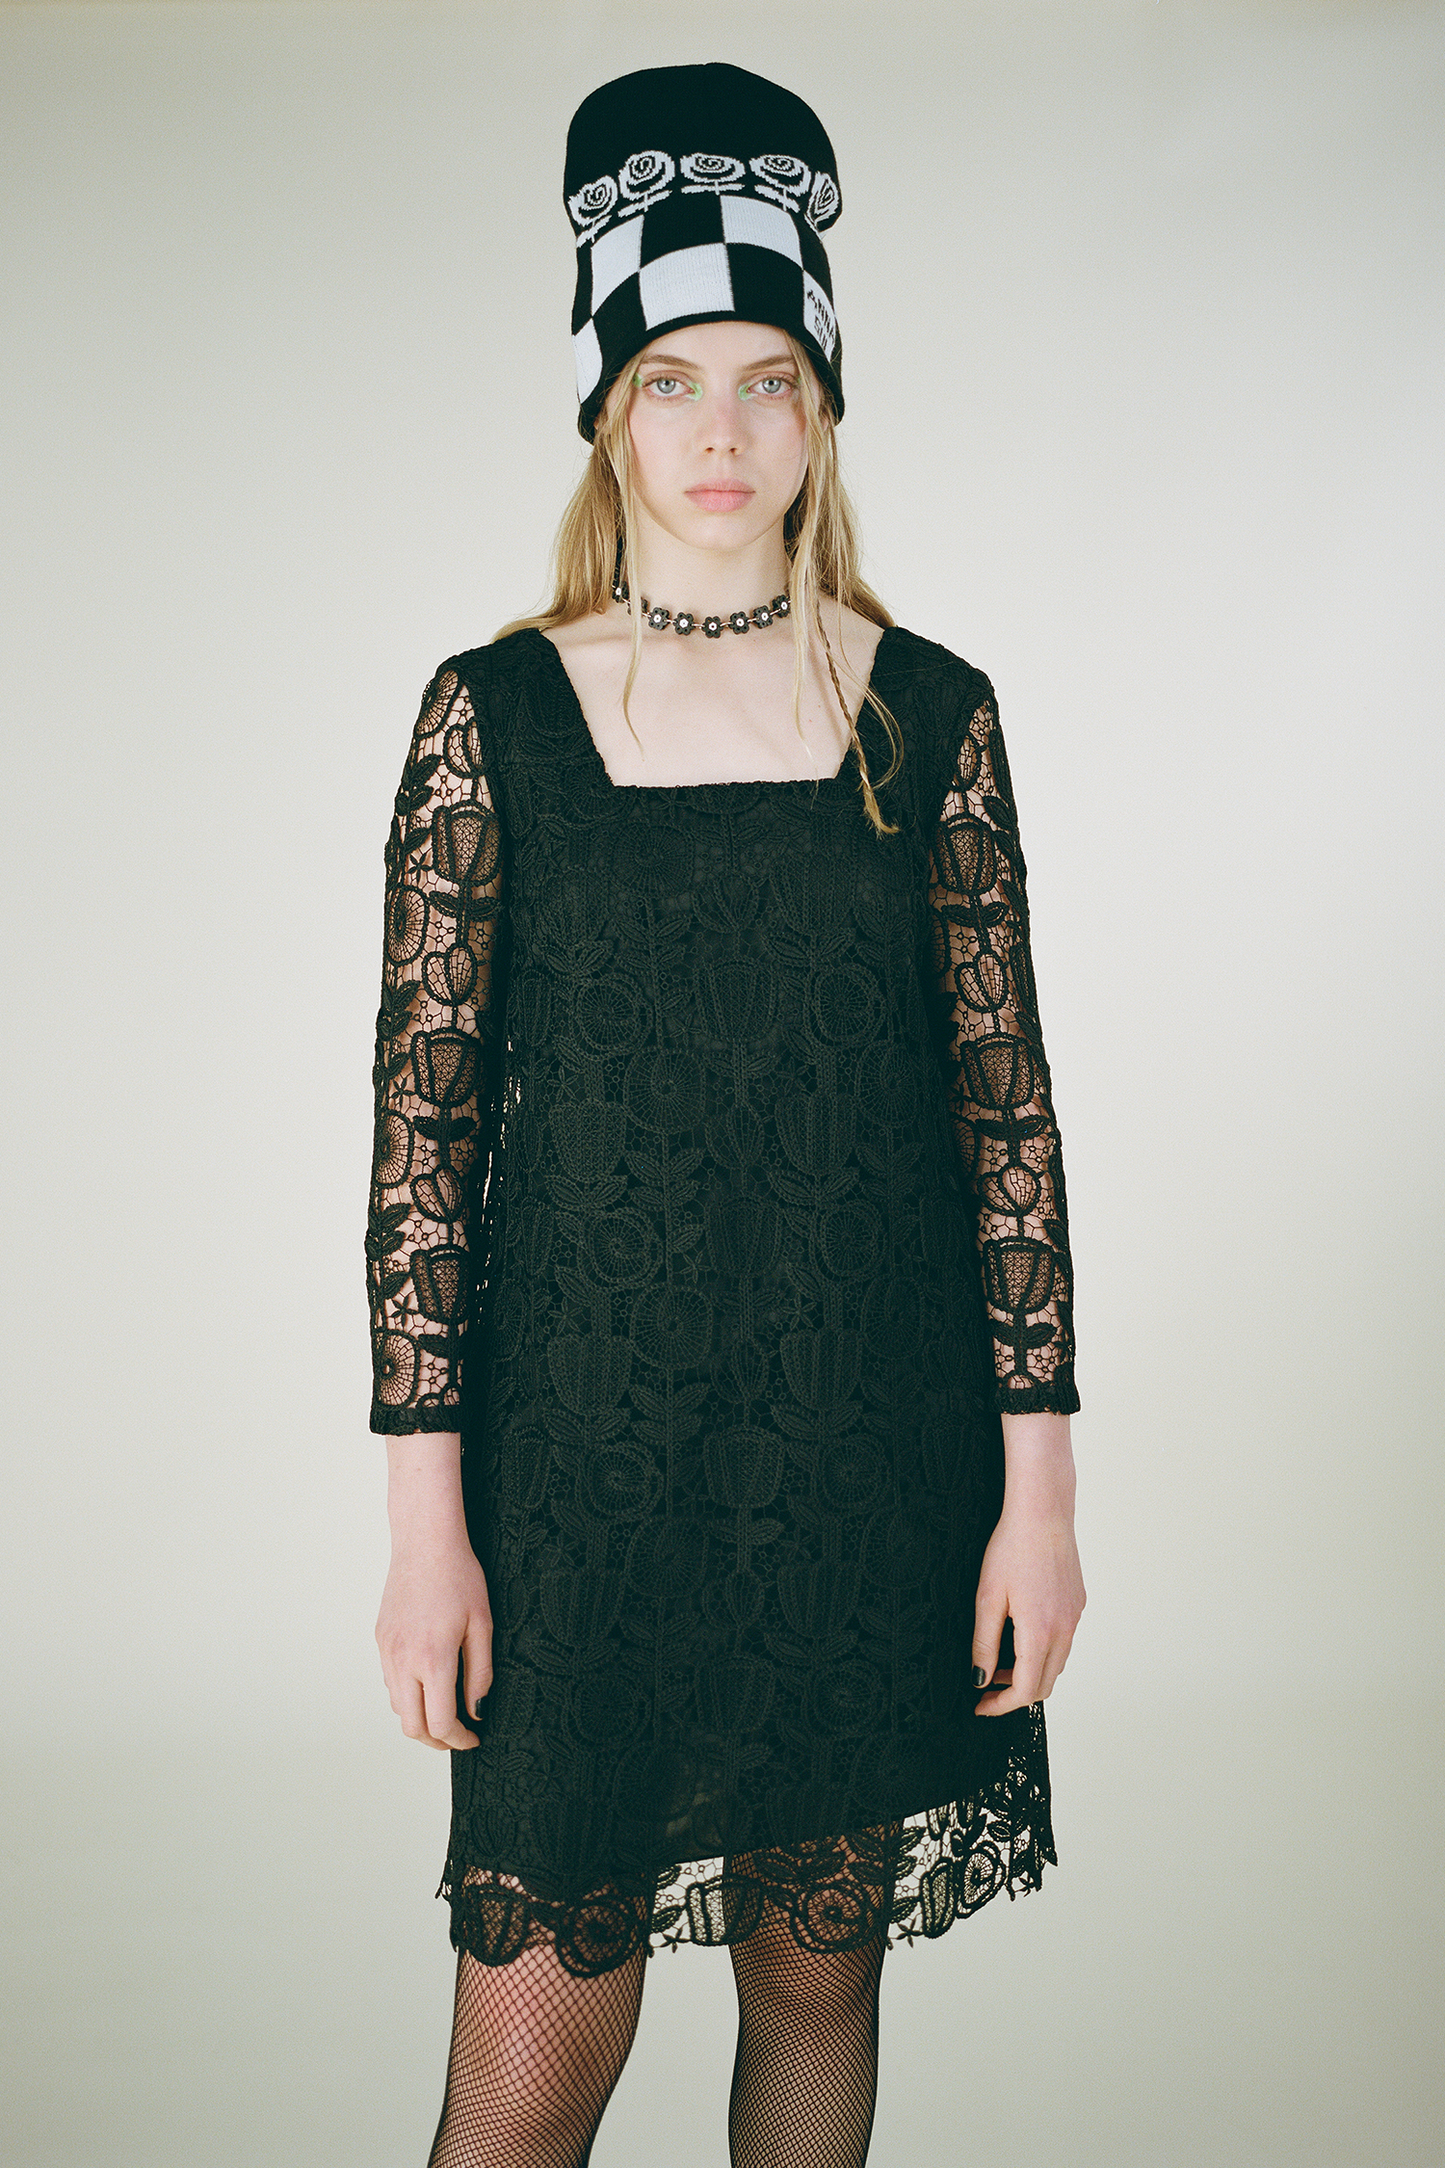 Garden Lace Madonna Dress Black, transparent lace on black support fabric, with floral design